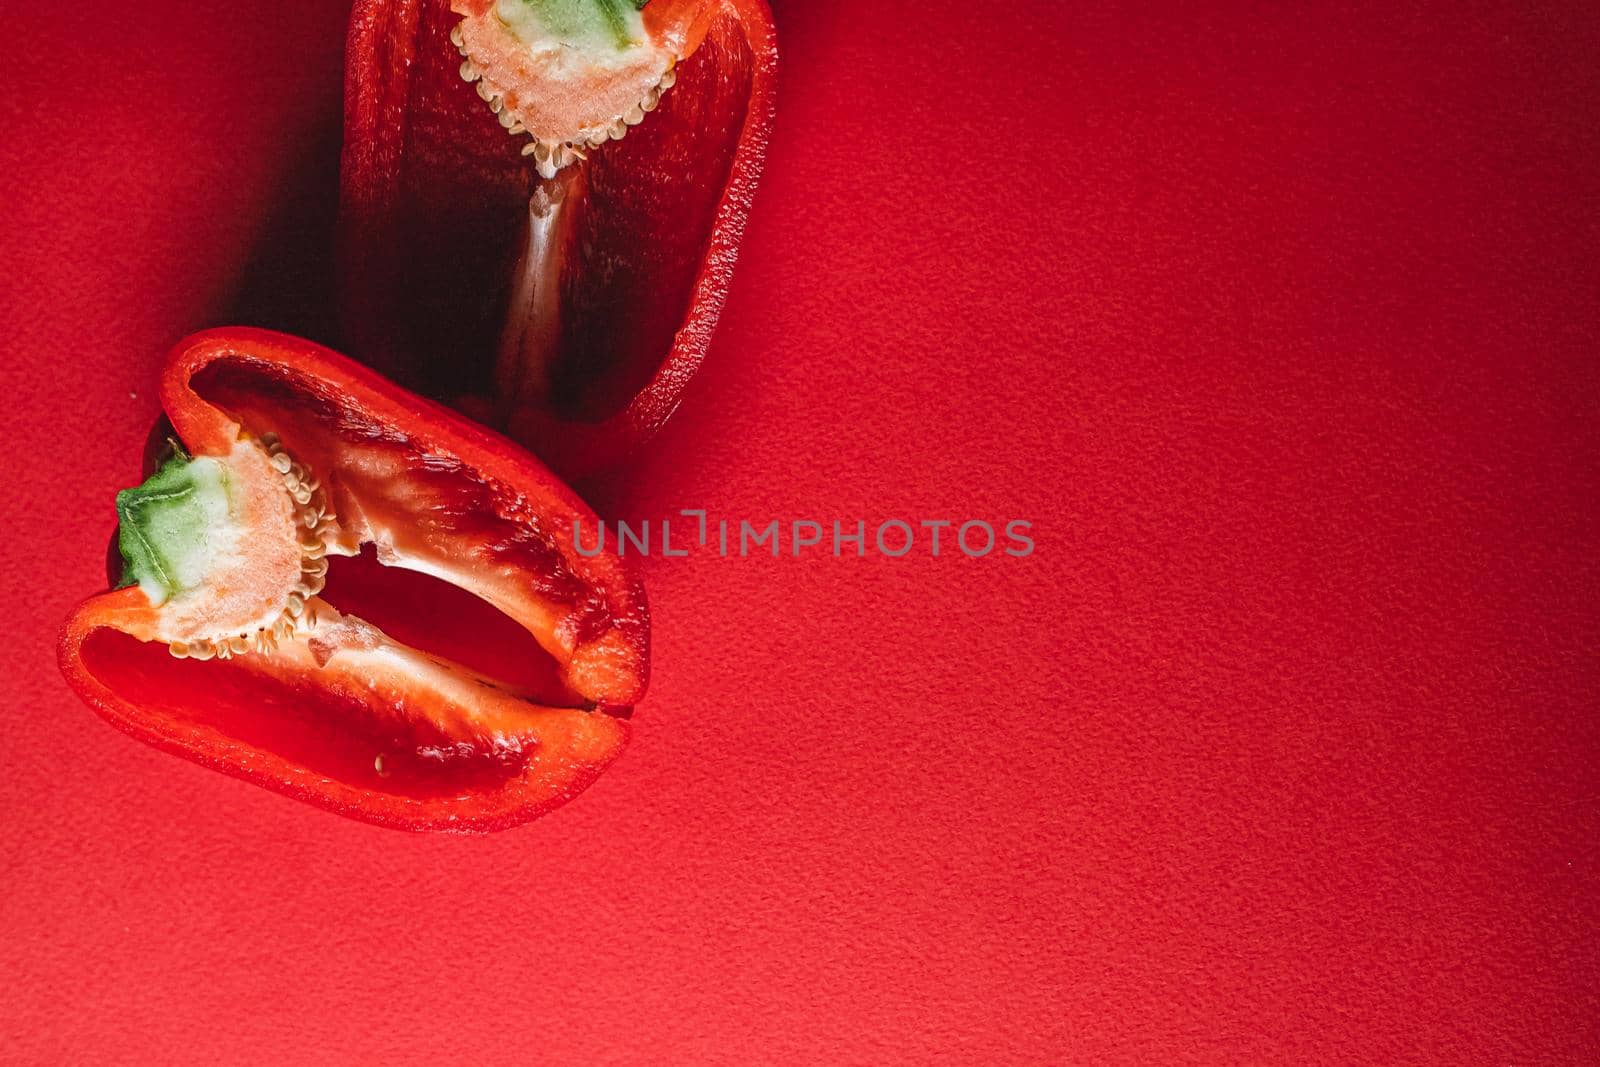 SWEET, fresh RED PEPPER ON A RED BACKGROUND, cut in half. photo for the menu, proper nutrition. fresh vegetables.